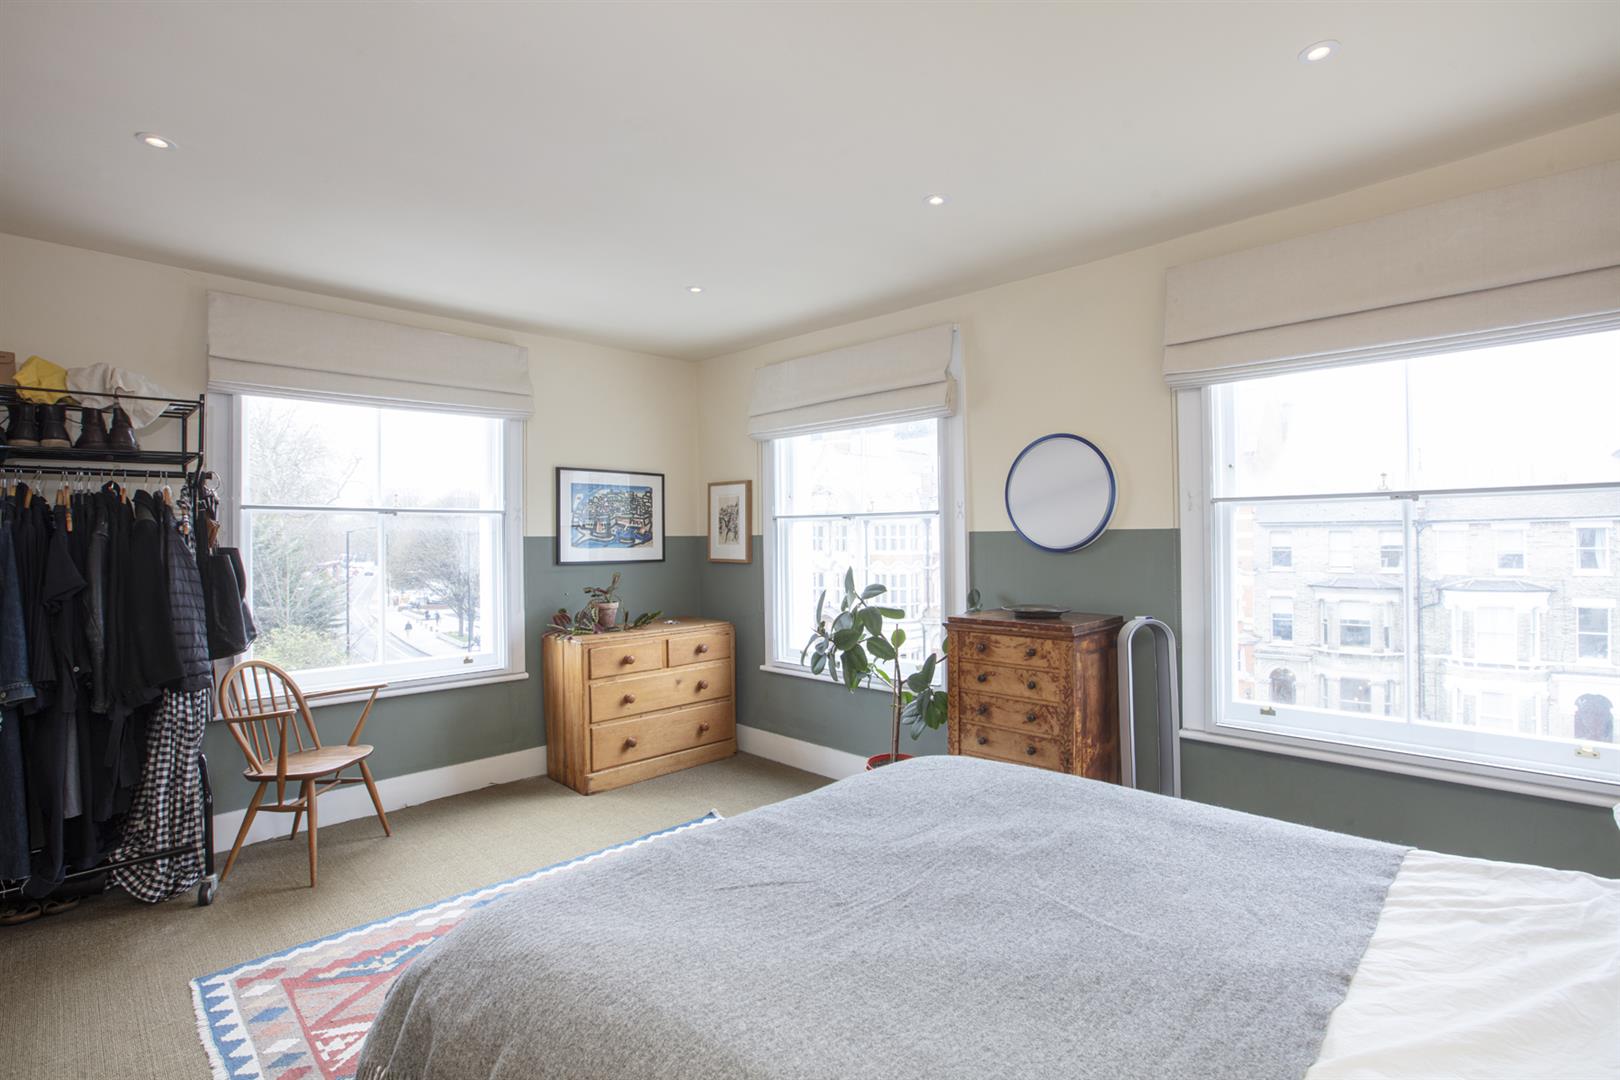 Flat - Conversion Sold in Peckham Road, Camberwell, SE5 1049 view7